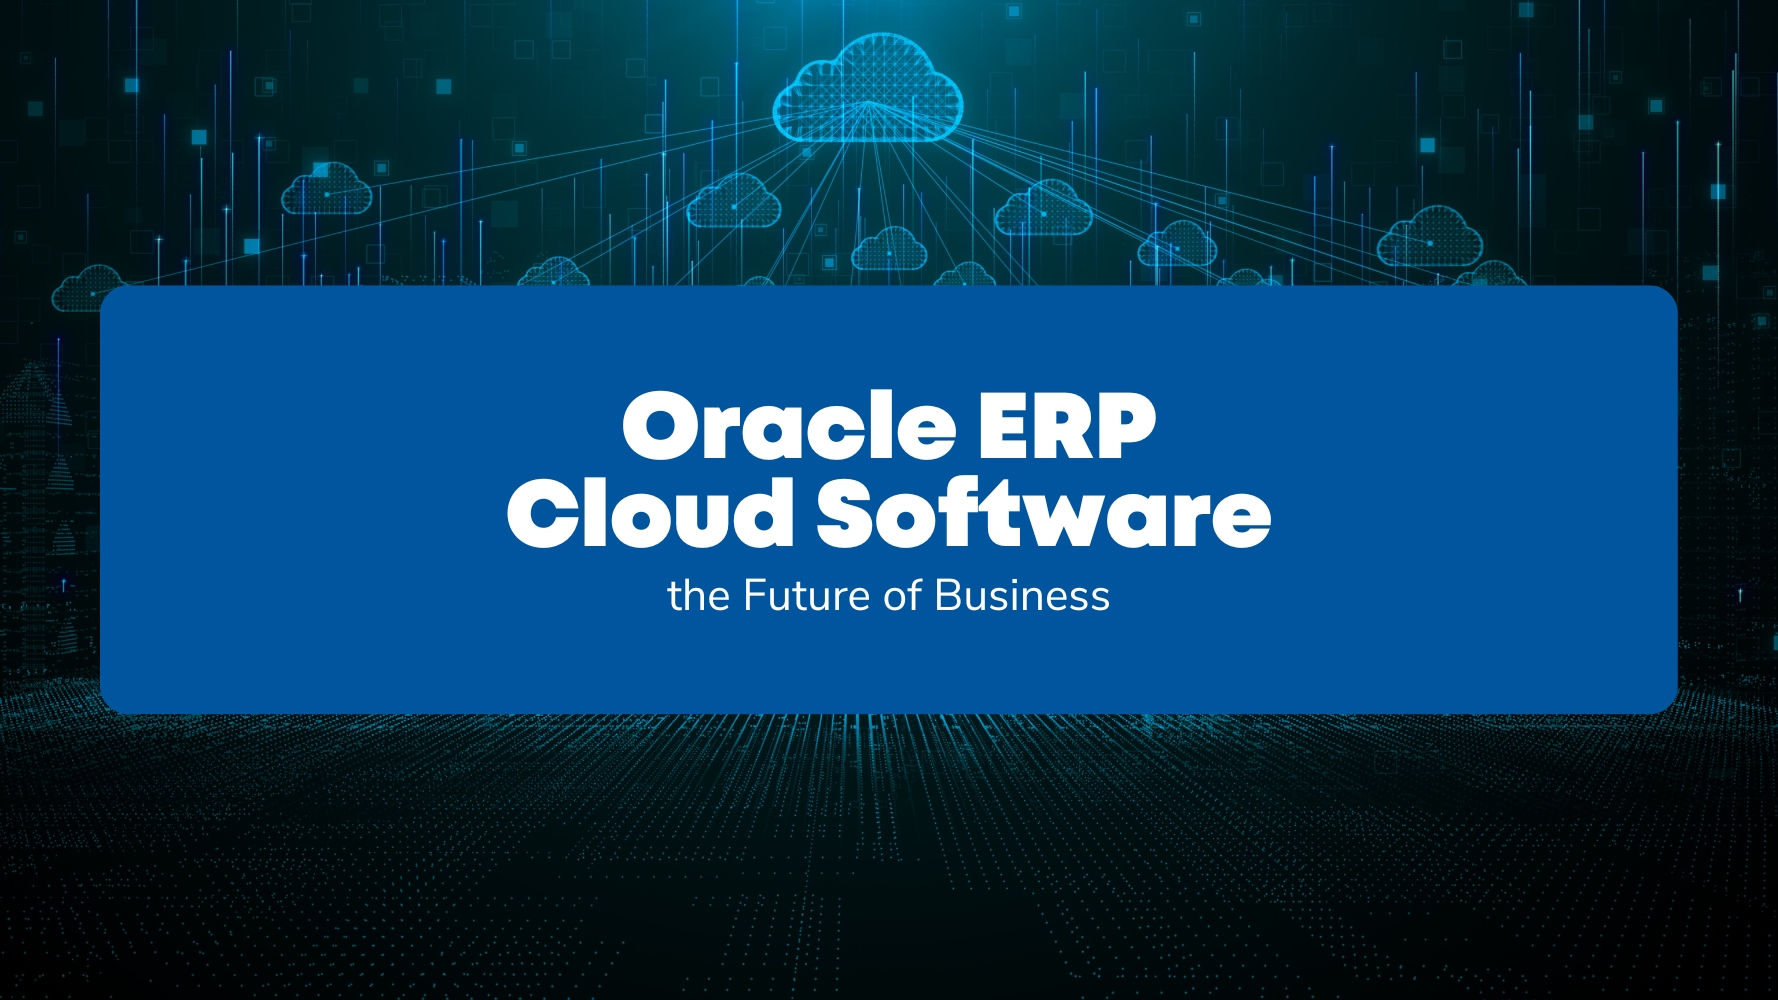 Oracle ERP Cloud Software the Future of Business.jpg